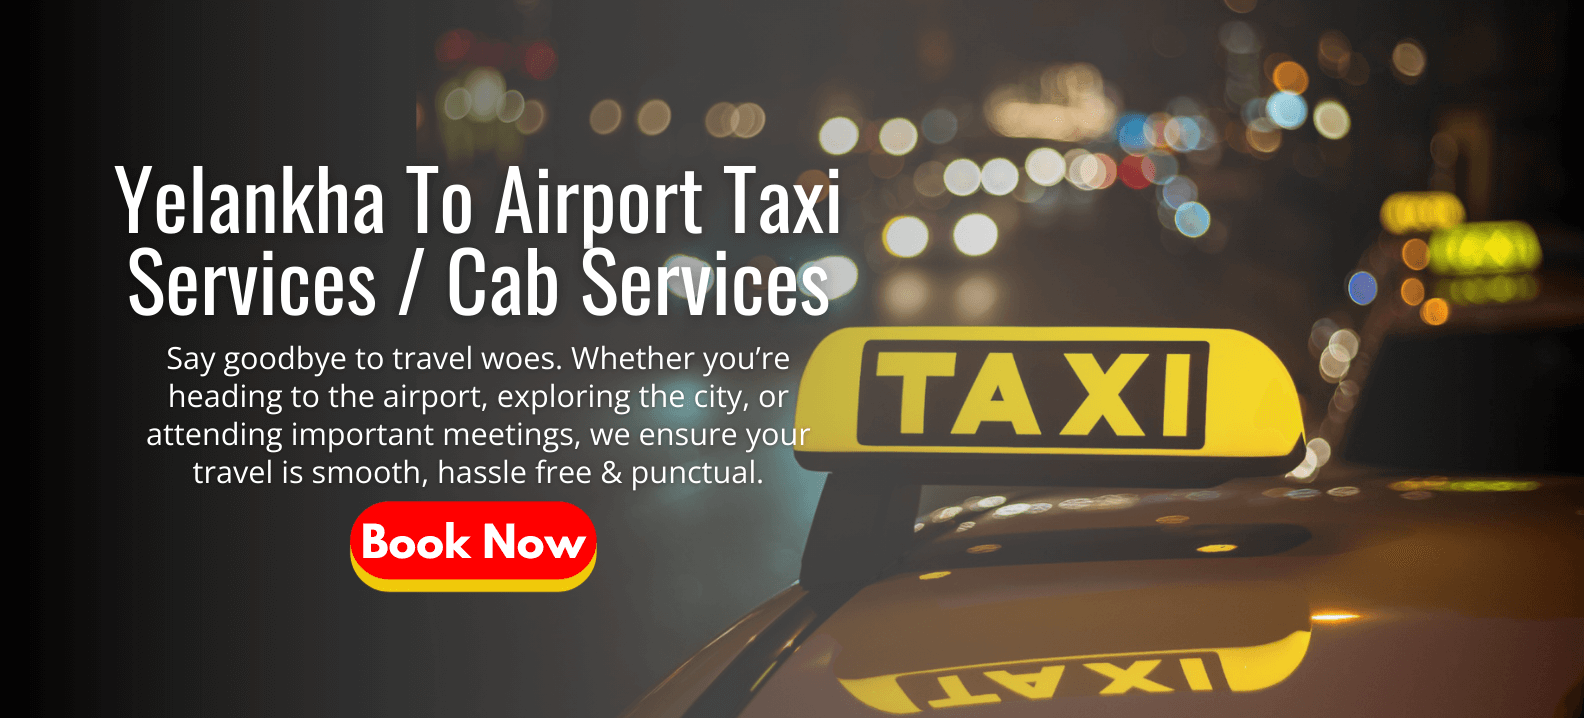 Yelankha To Airport Taxi Services | Cab Services